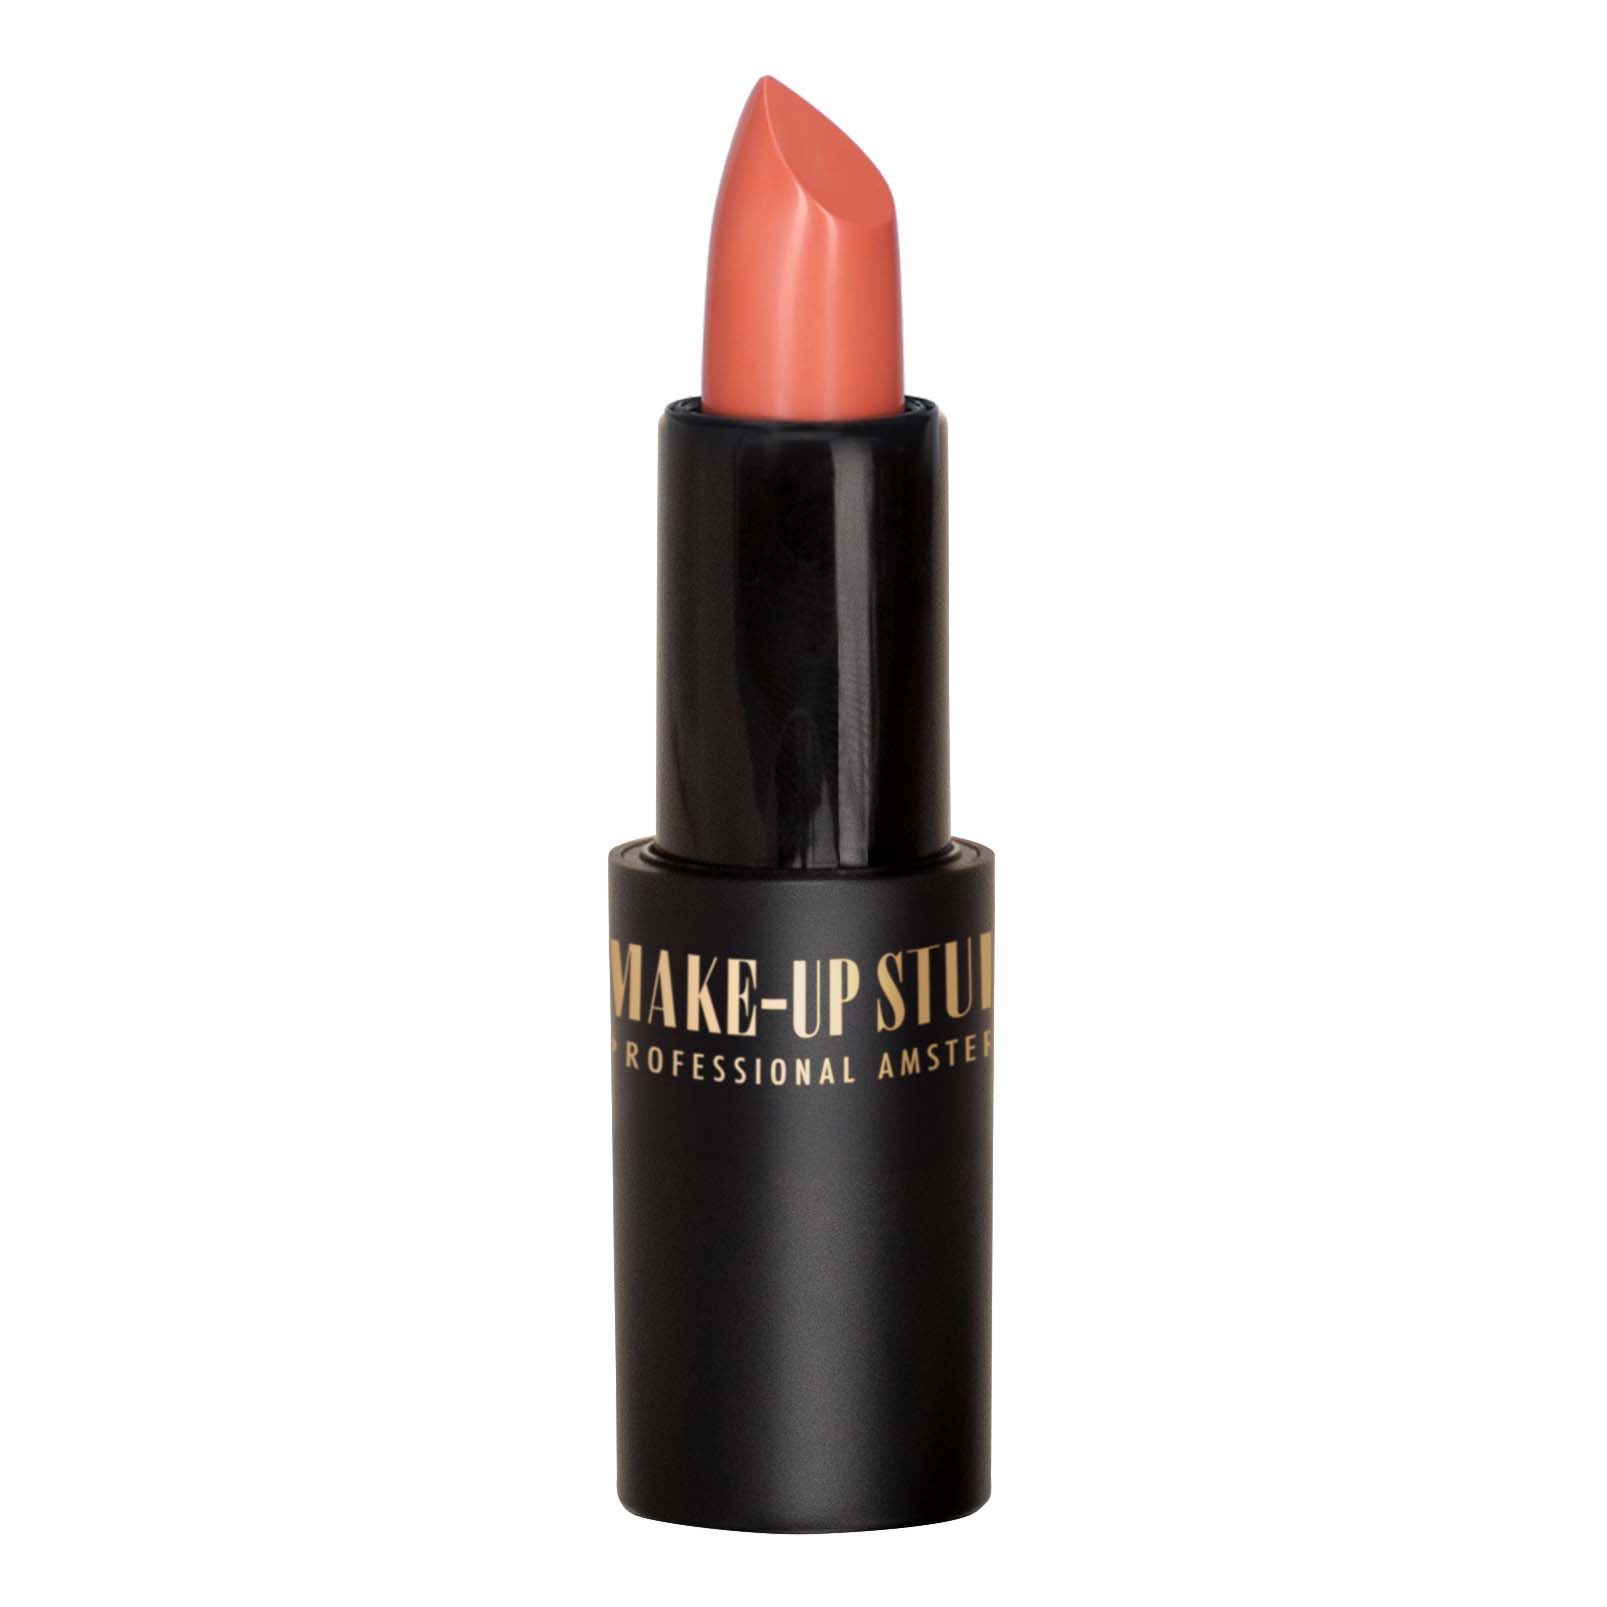 Shop all lip products from Make-up Studio Amsterdam Make-up | Studio online